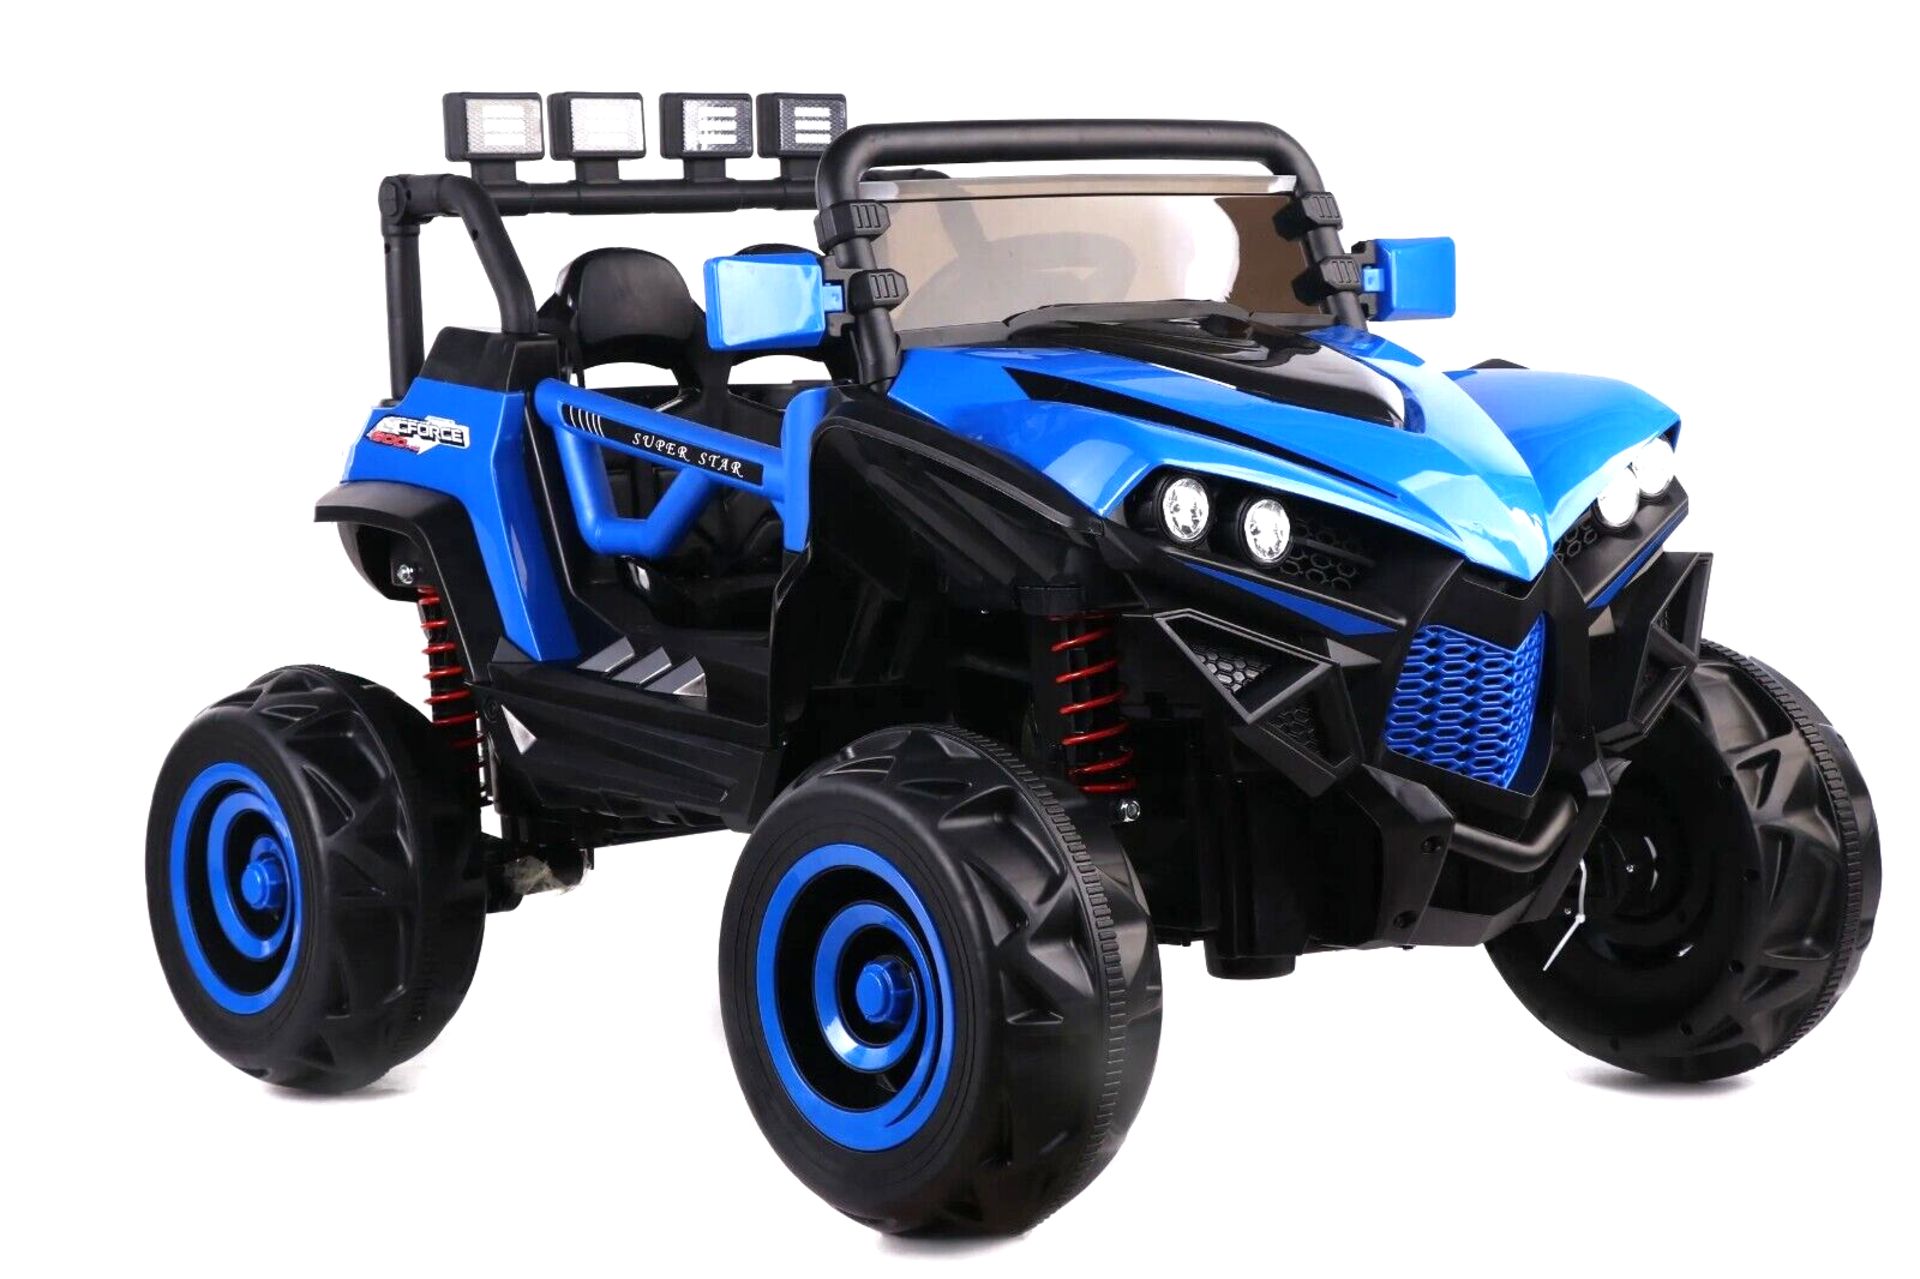 BLUE 4X4 ATV/UTV KIDS BUGGY JEEP ELECTRIC CAR WITH REMOTE BRAND NEW BOXED